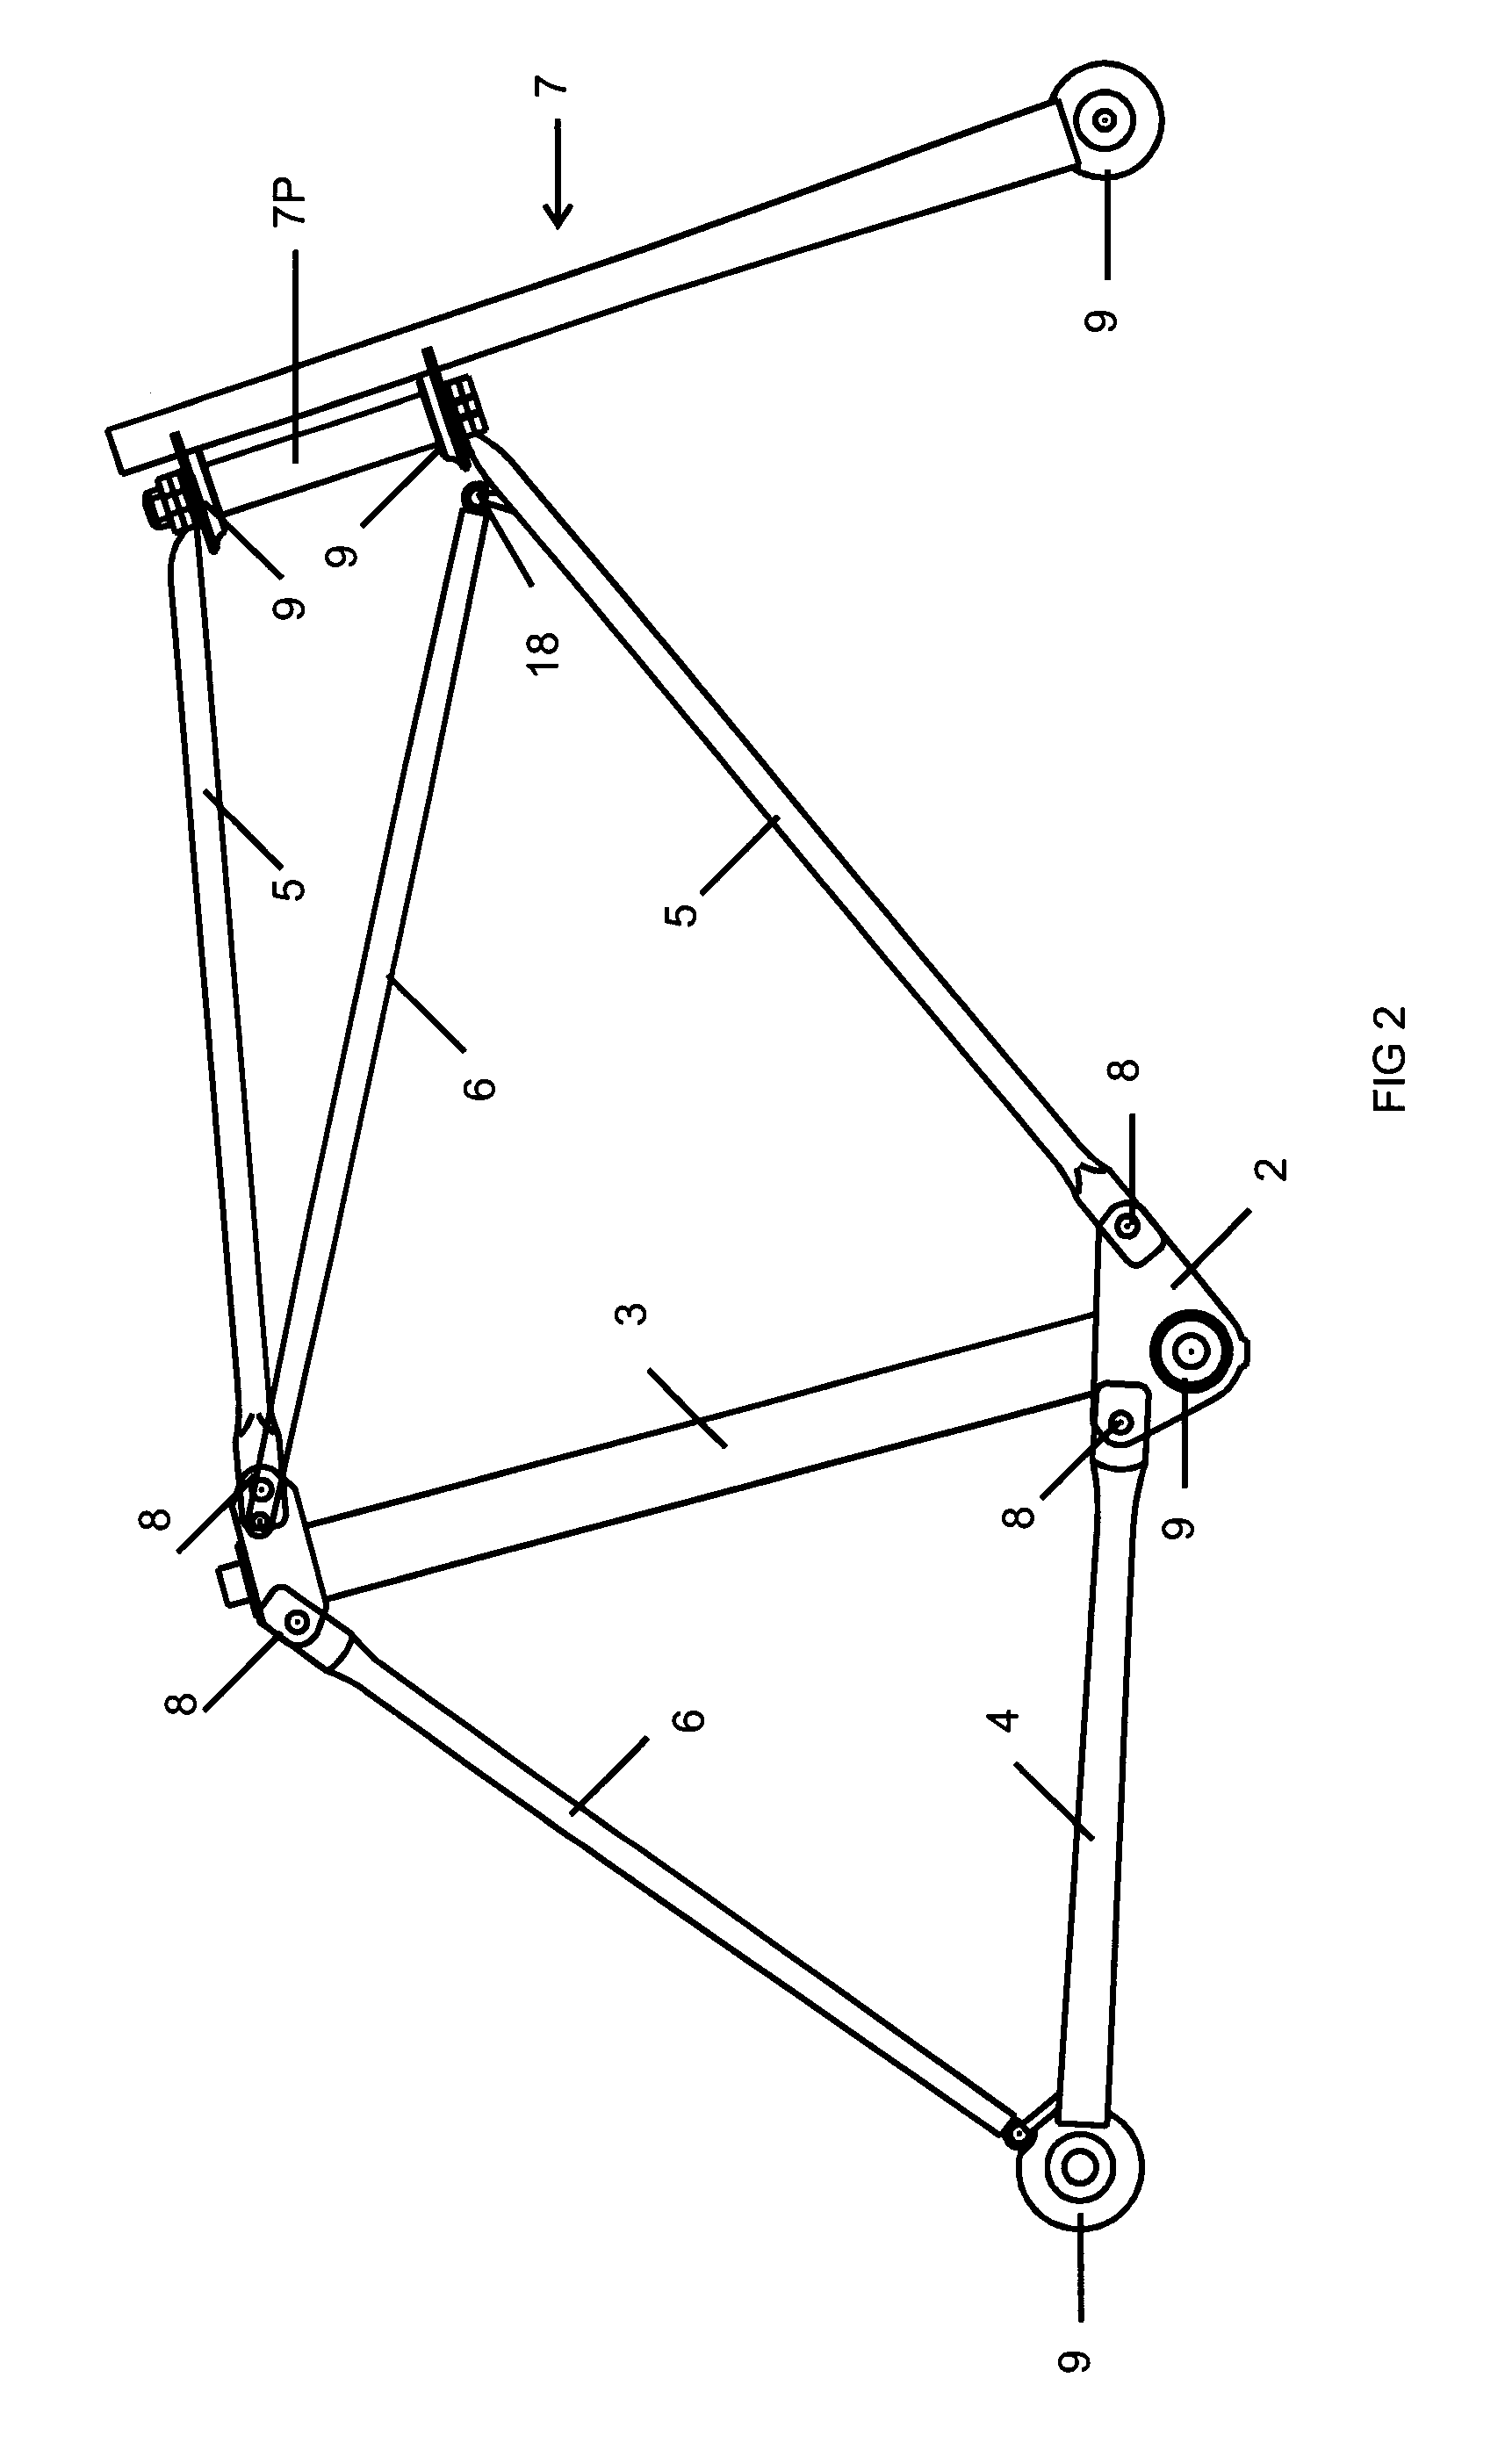 Bicycle frame and bicycle